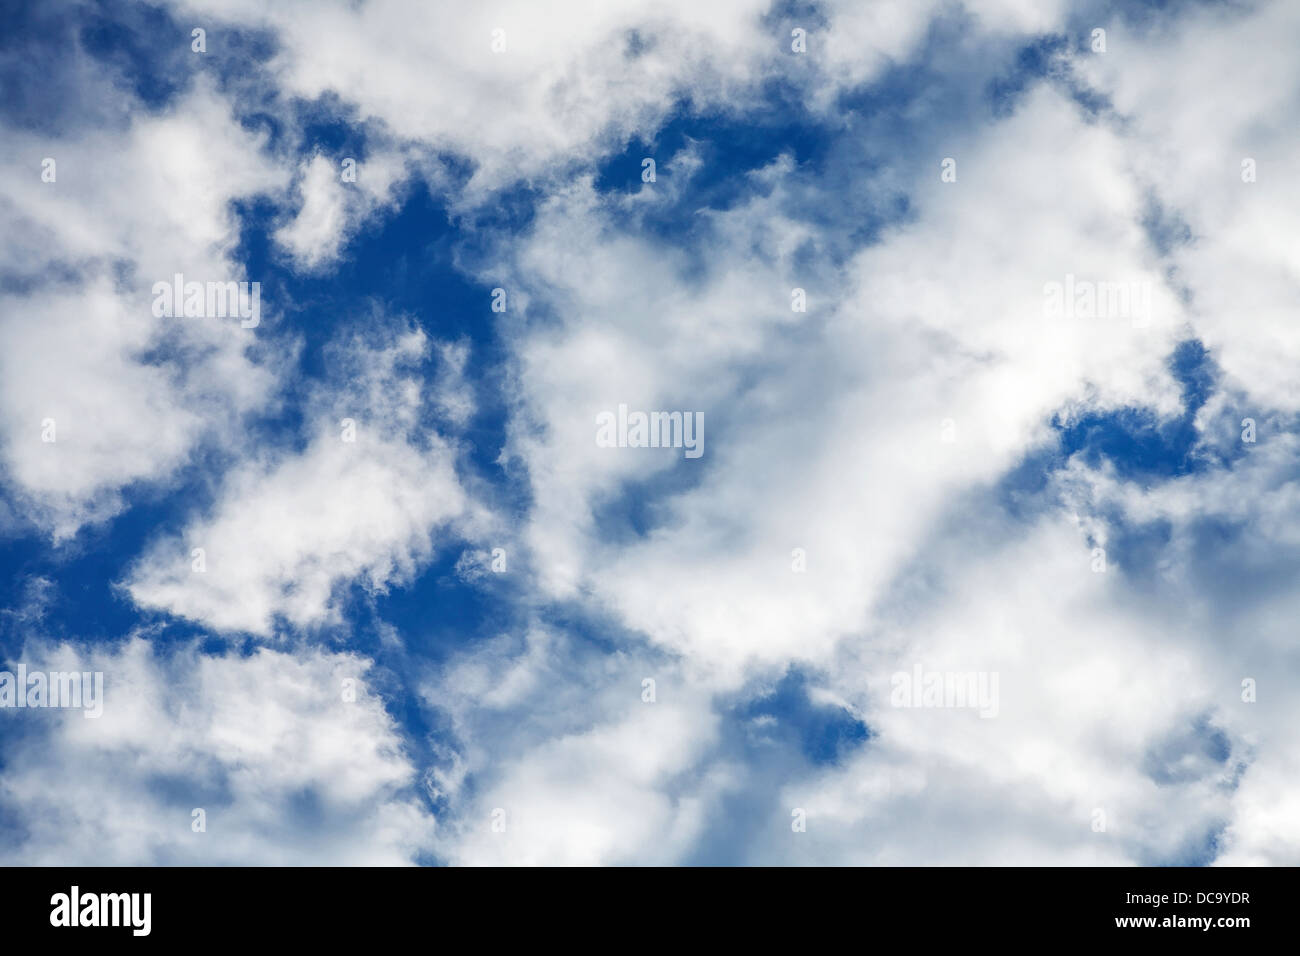 Blue sky and white fluffy clouds Stock Photo